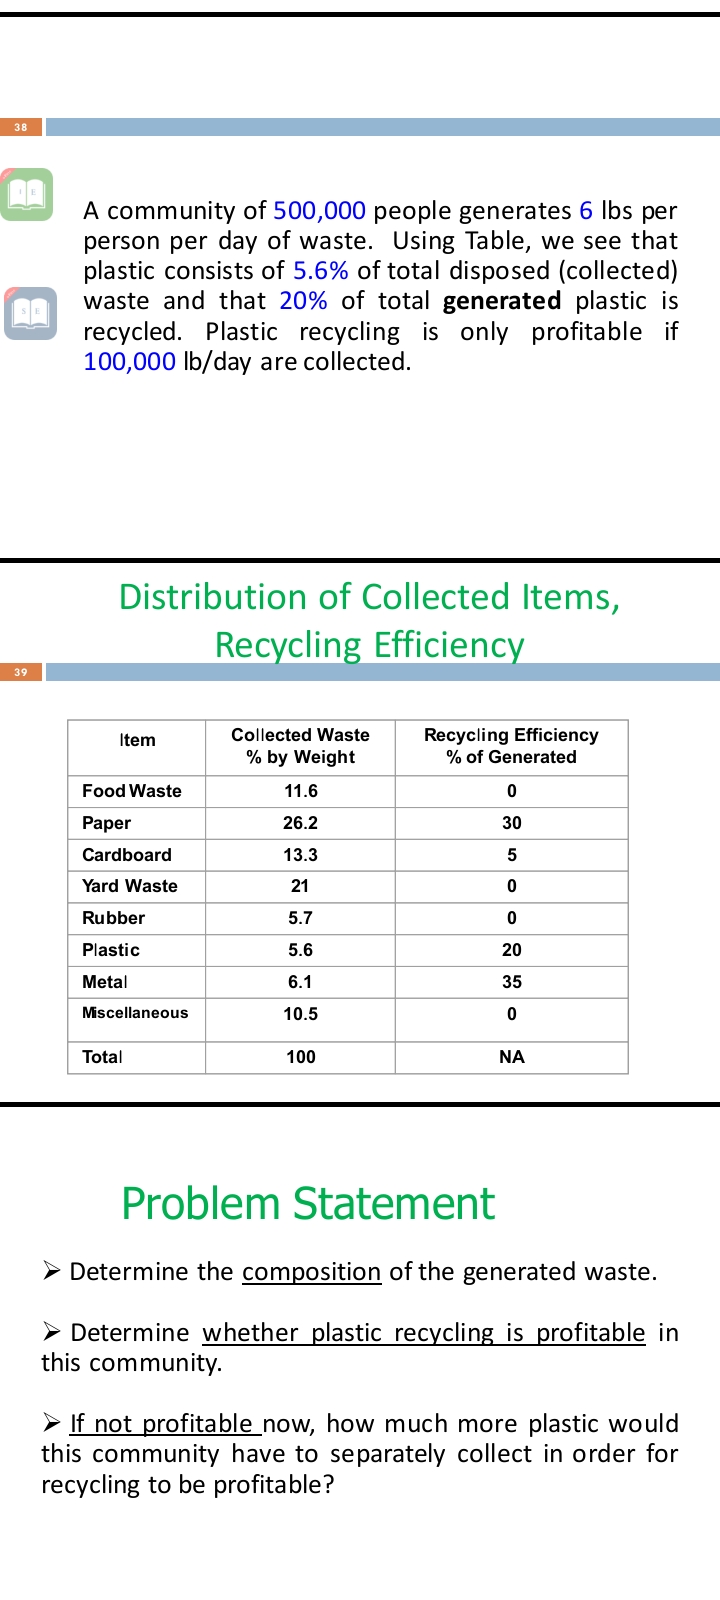 38
A community of 500,000 people generates 6 Ibs per
person per day of waste. Using Table, we see that
plastic consists of 5.6% of total disposed (collected)
waste and that 20% of total generated plastic is
recycled. Plastic recycling is only profitable if
100,000 lb/day are collected.
Distribution of Collected Items,
Recycling Efficiency
39
Collected Waste
Recycling Efficiency
% of Generated
Item
% by Weight
Food Waste
11.6
Раper
26.2
30
Cardboard
13.3
Yard Waste
21
Rubber
5.7
Plastic
5.6
20
Metal
6.1
35
Miscellaneous
10.5
Total
100
NA
Problem Statement
> Determine the composition of the generated waste.
> Determine whether plastic recycling is profitable in
this community.
> If not profitable_now, how much more plastic would
this community have to separately collect in order for
recycling to be profitable?
